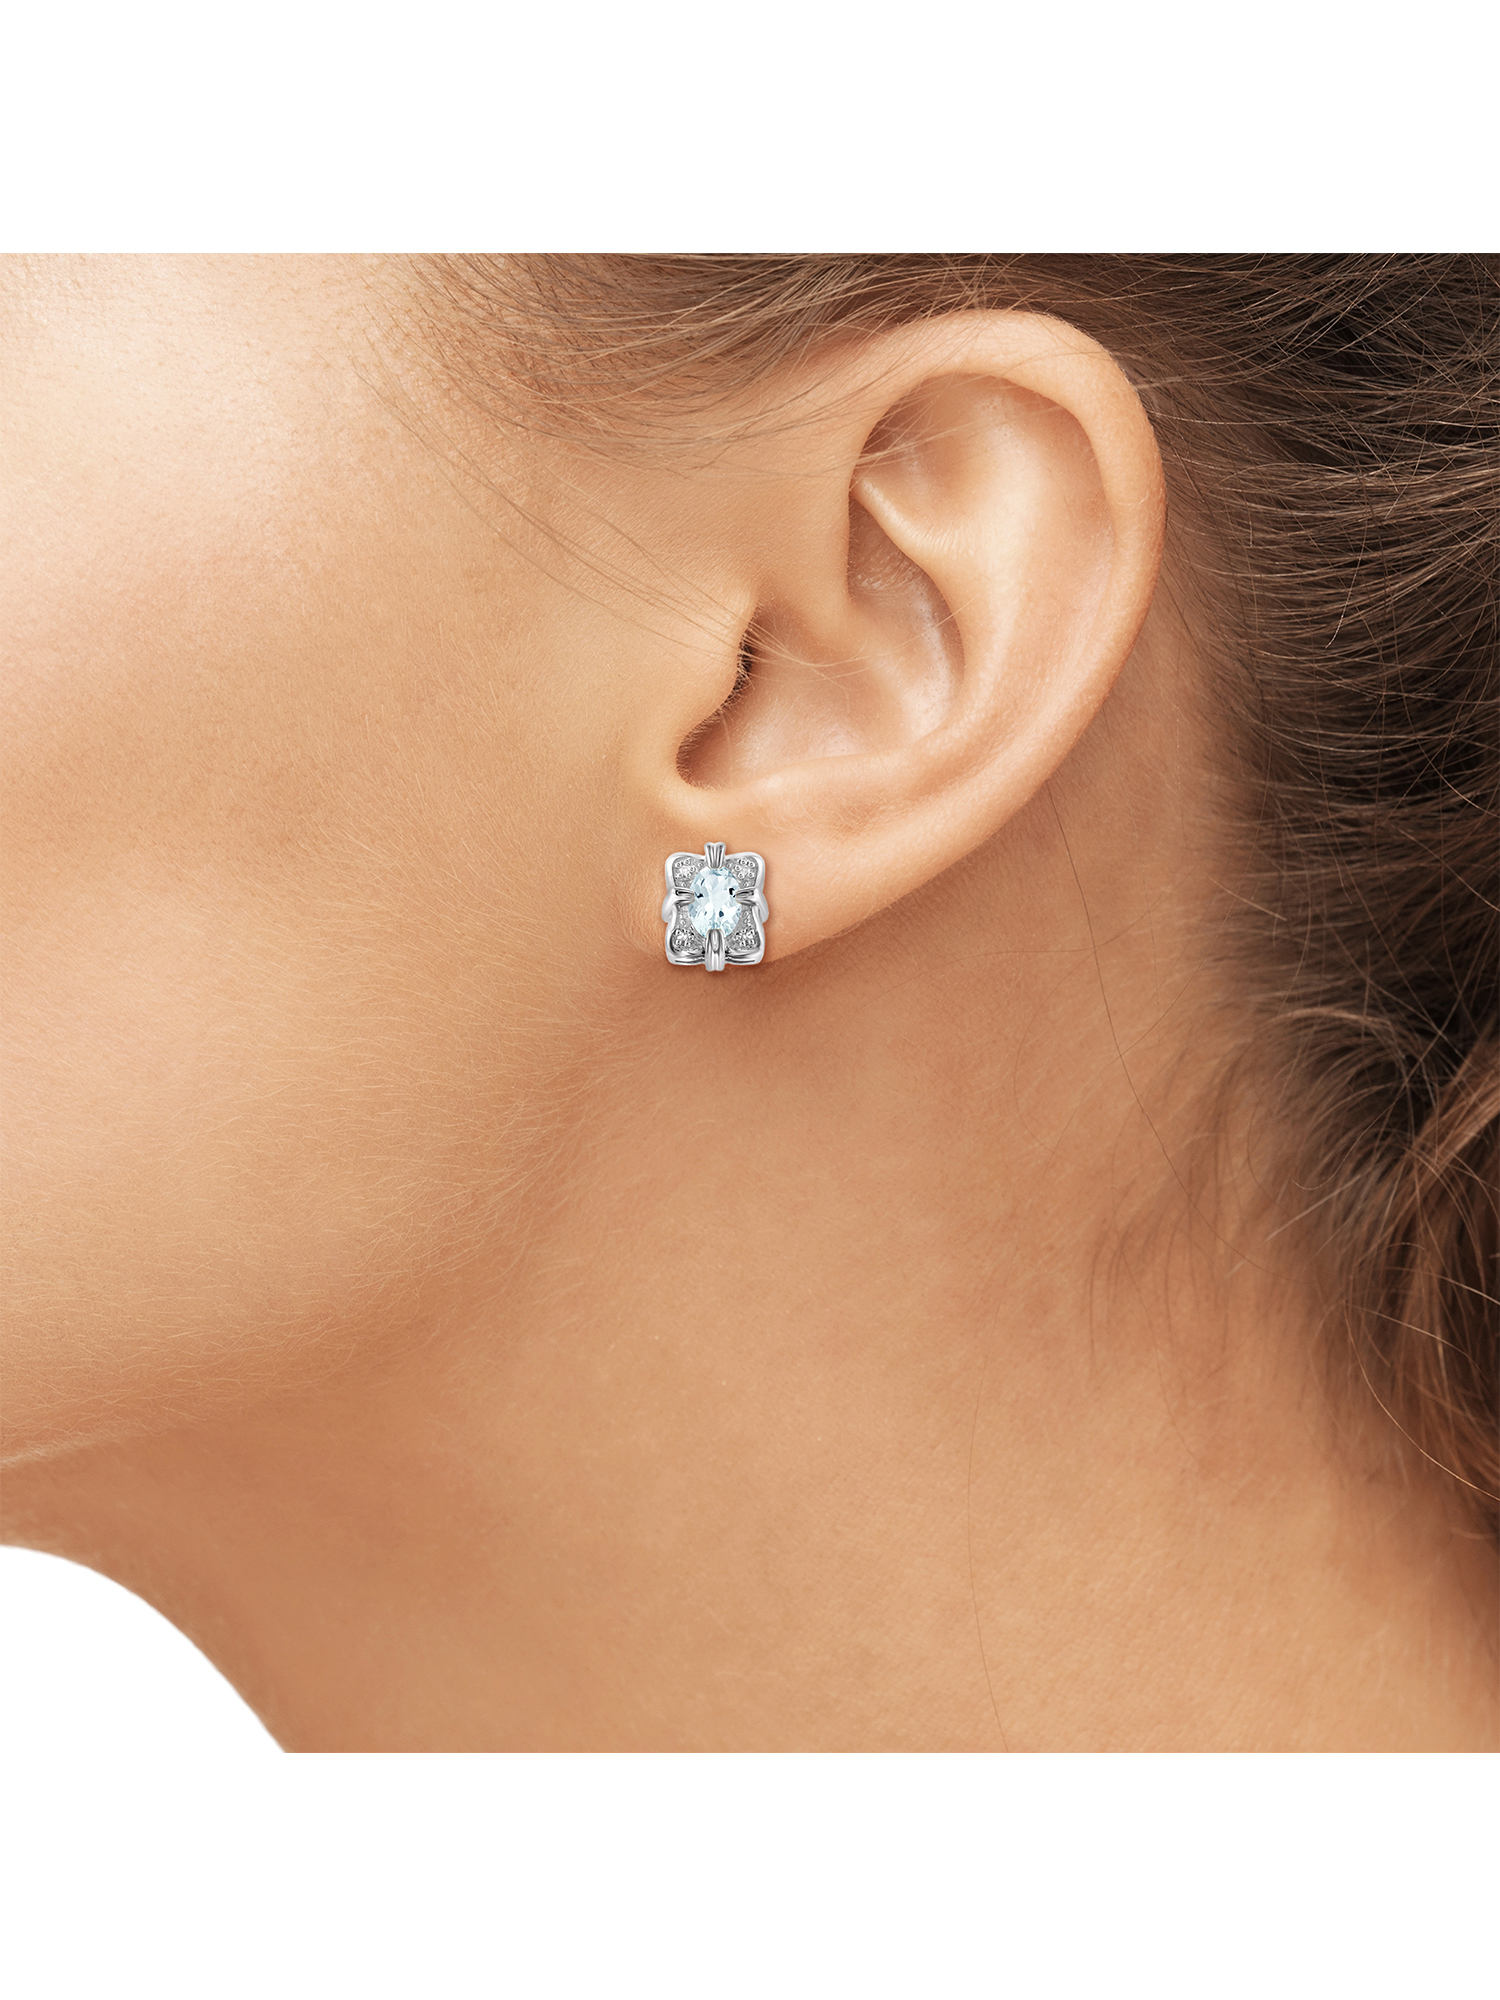 0.88 Carat Aquamarine Gemstone and Accent White Diamond Women's Sterling Silver Earrings - image 2 of 3